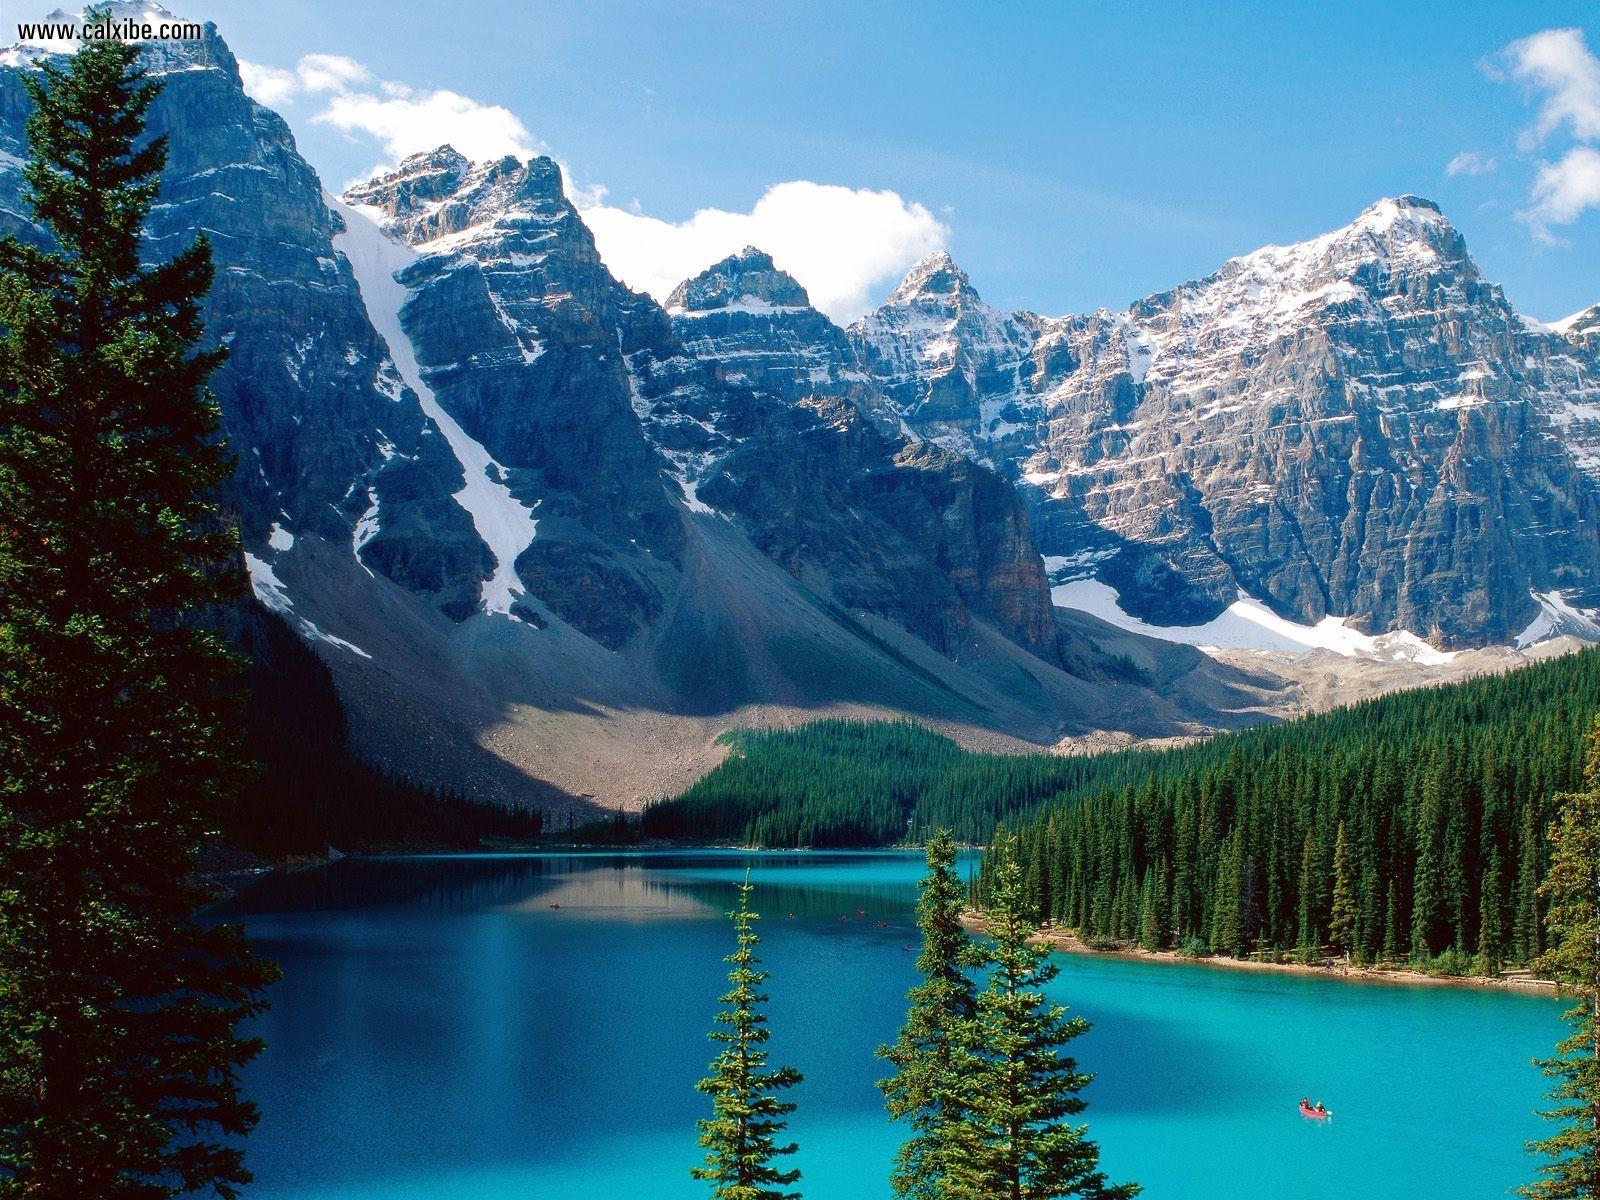 Nature: Moraine Lake Banff National Park Canada, picture nr. 17452